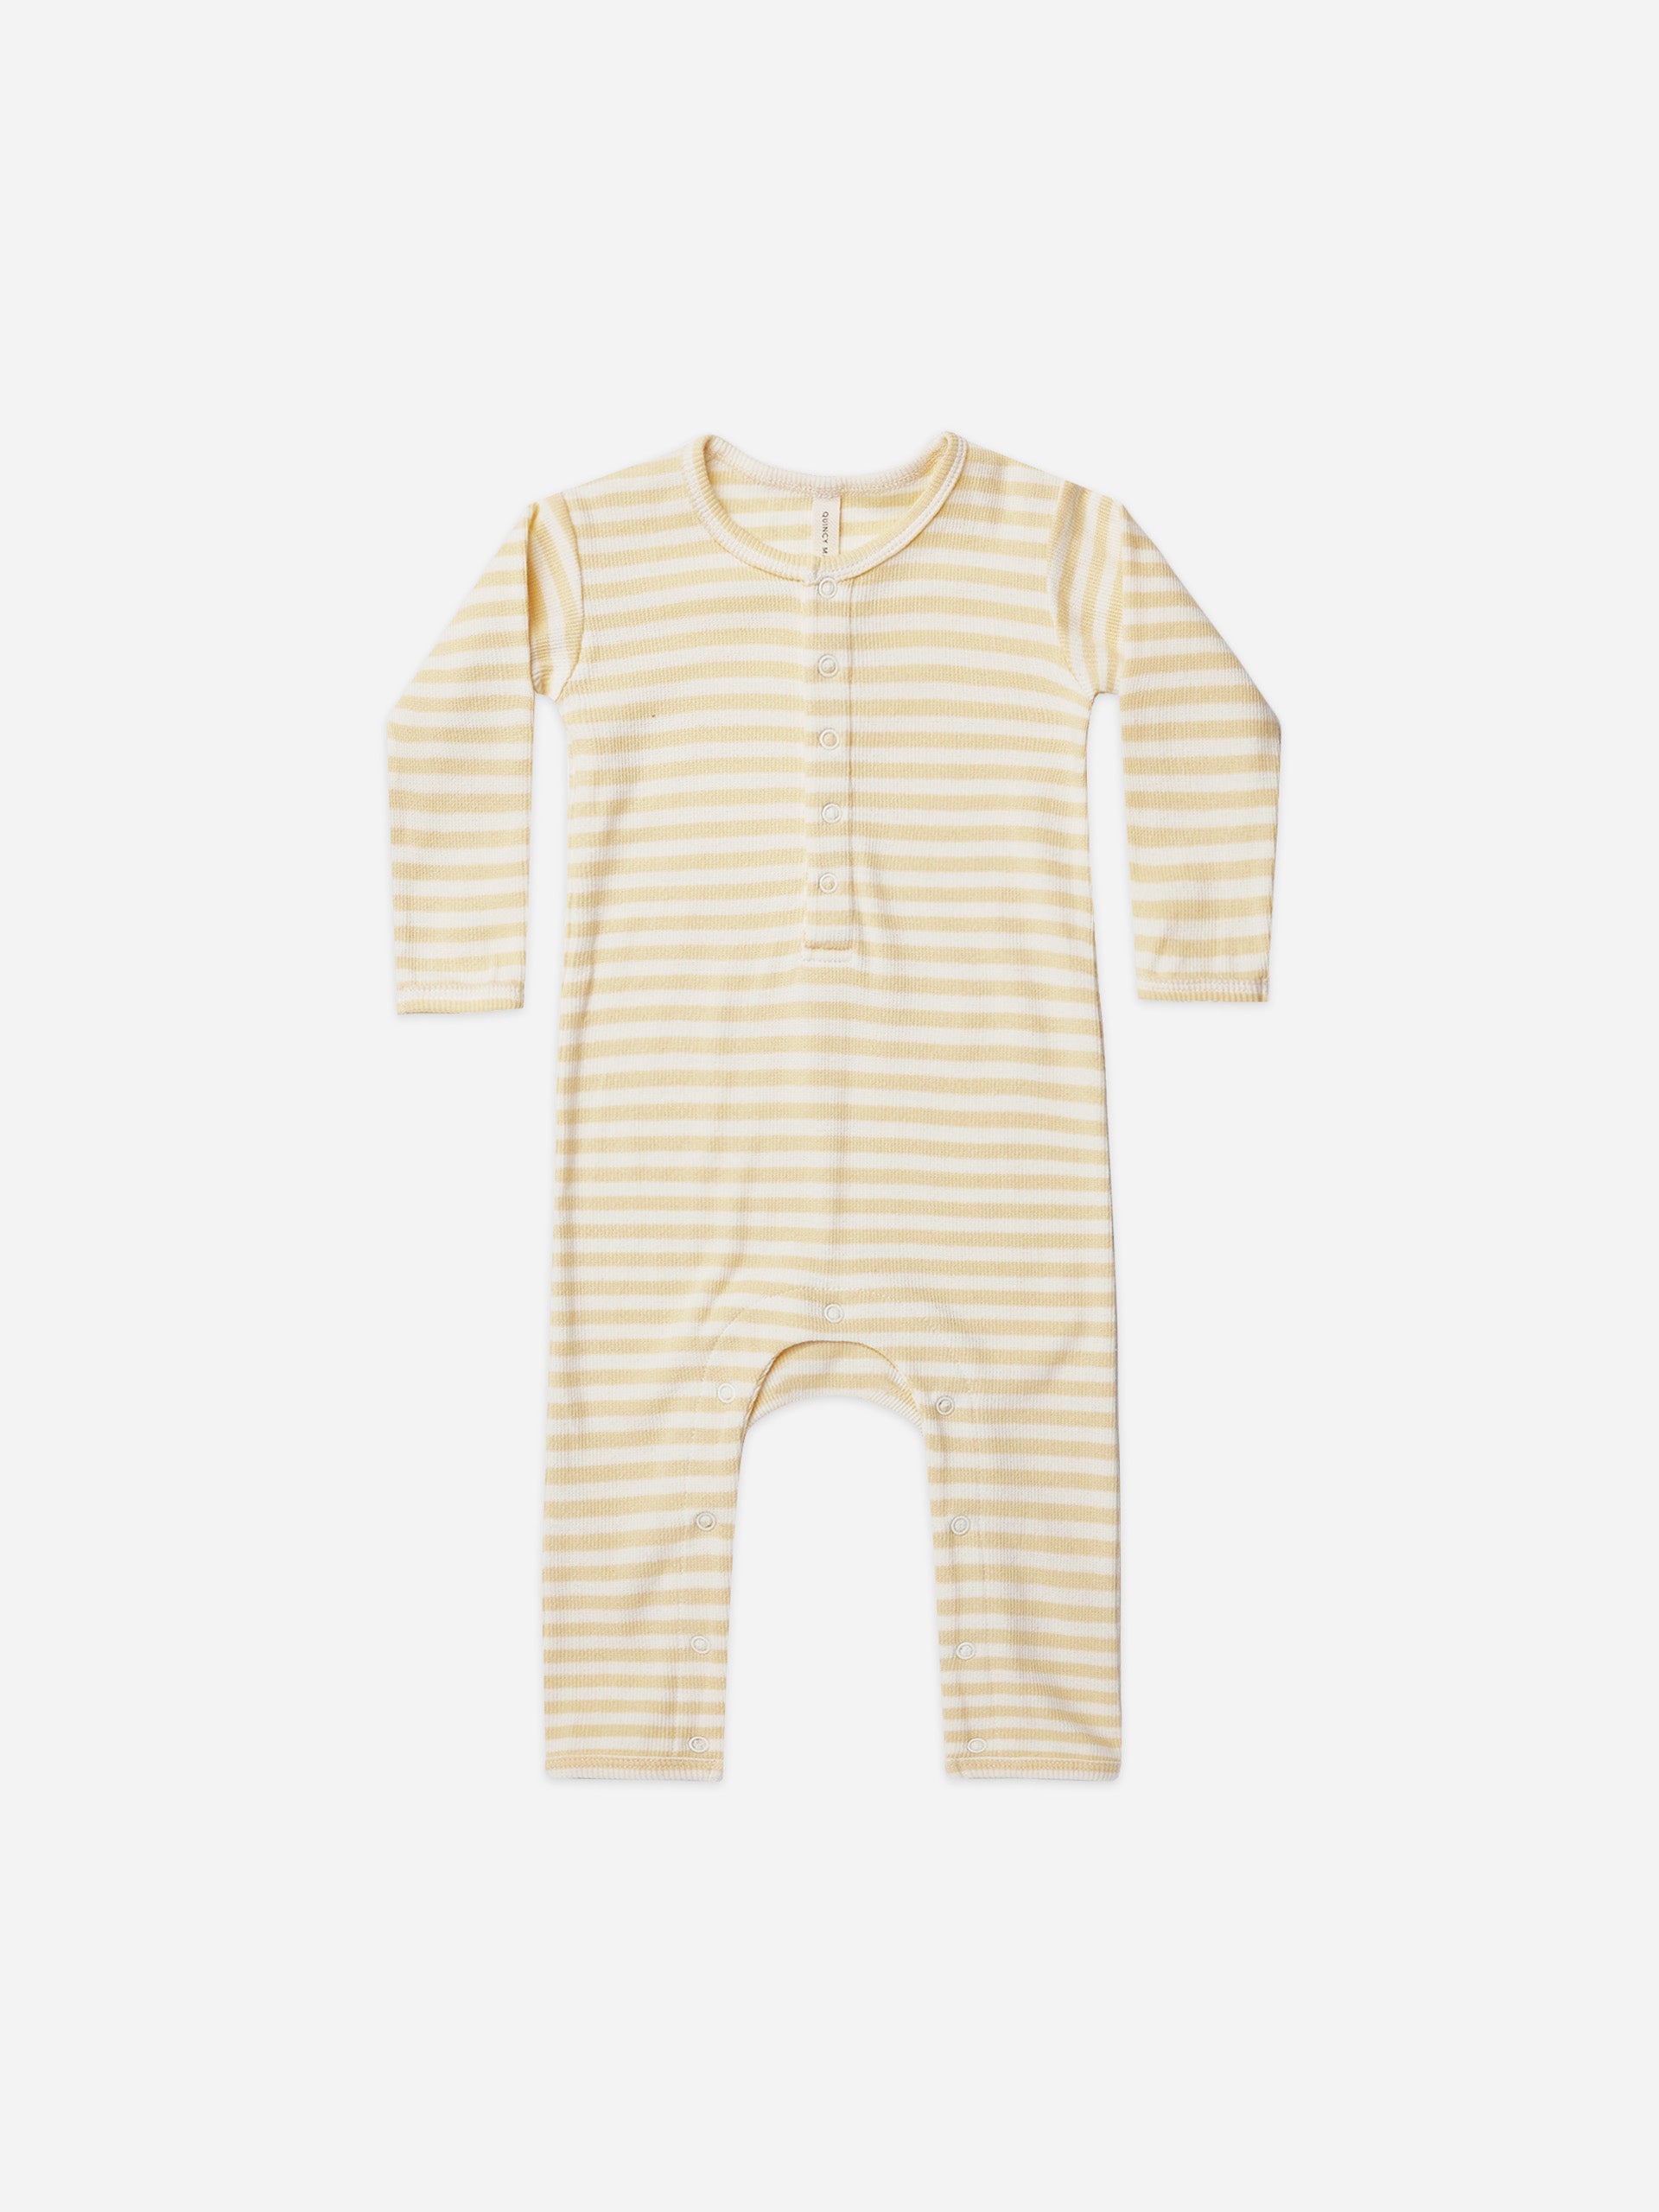 ribbed baby jumpsuit | yellow stripe - Quincy Mae | Baby Basics | Baby Clothing | Organic Baby Clothes | Modern Baby Boy Clothes |